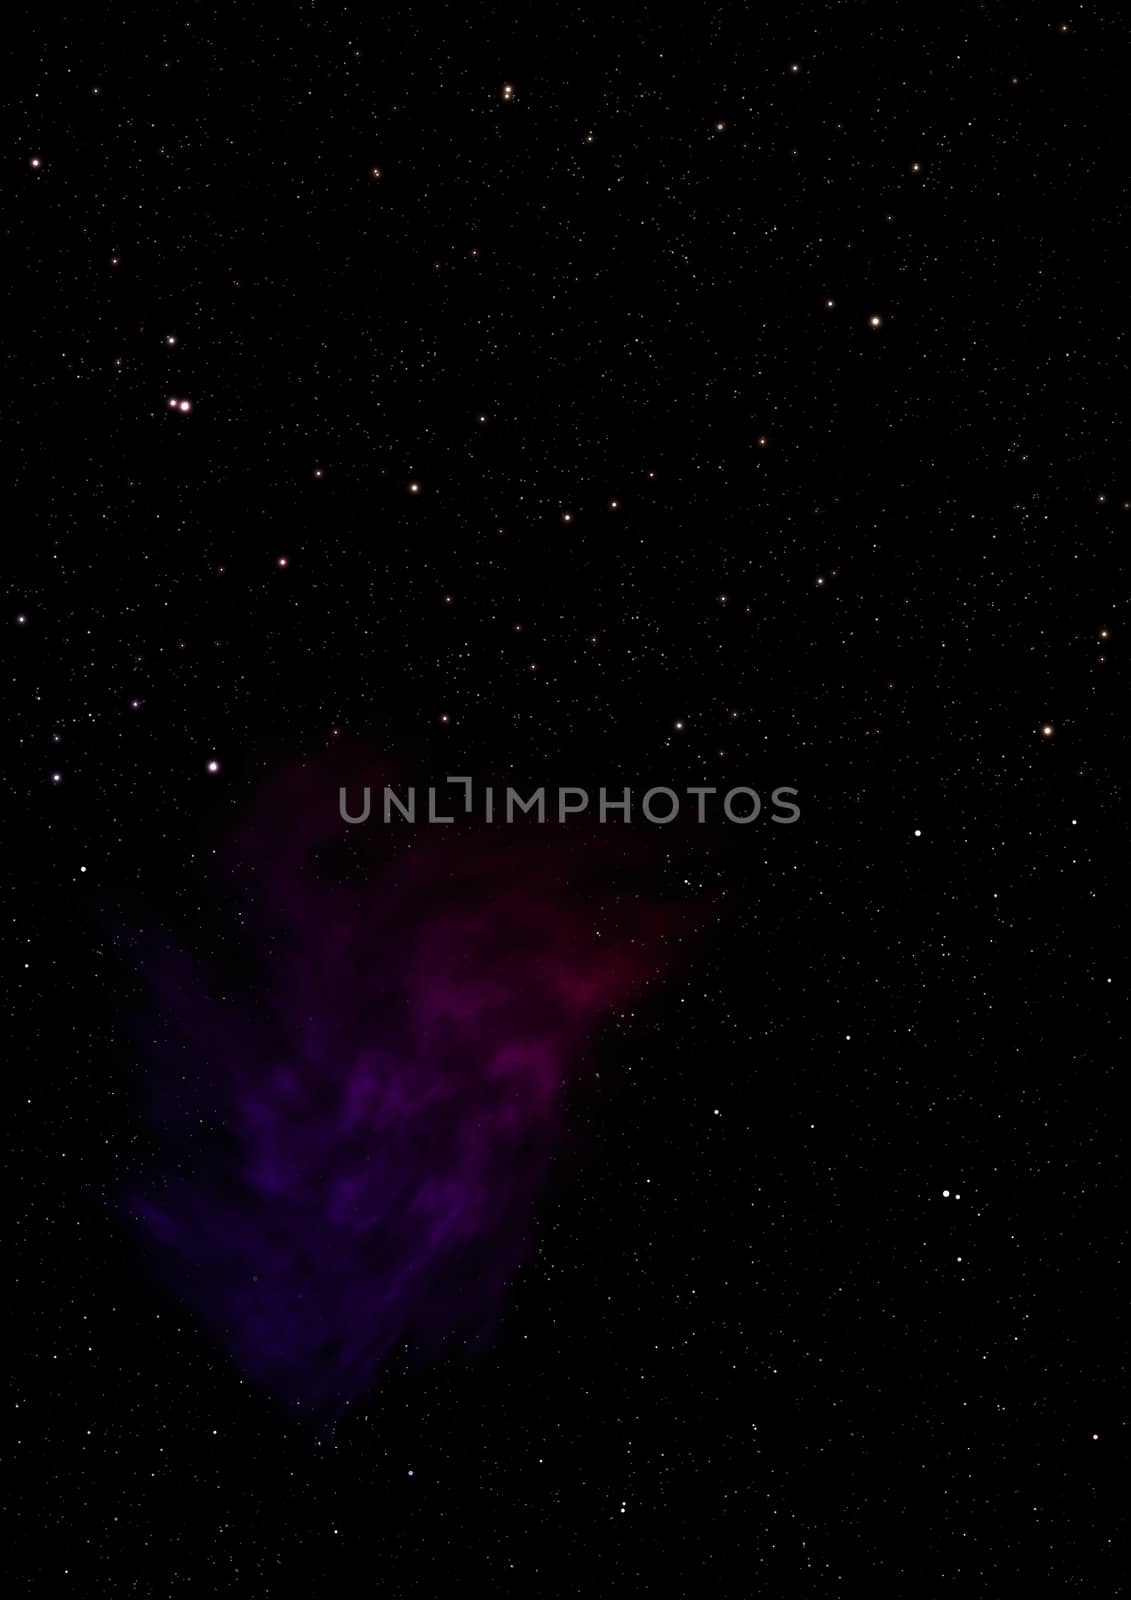 Star field and distant cold space nebula. "Elements of this image furnished by NASA".